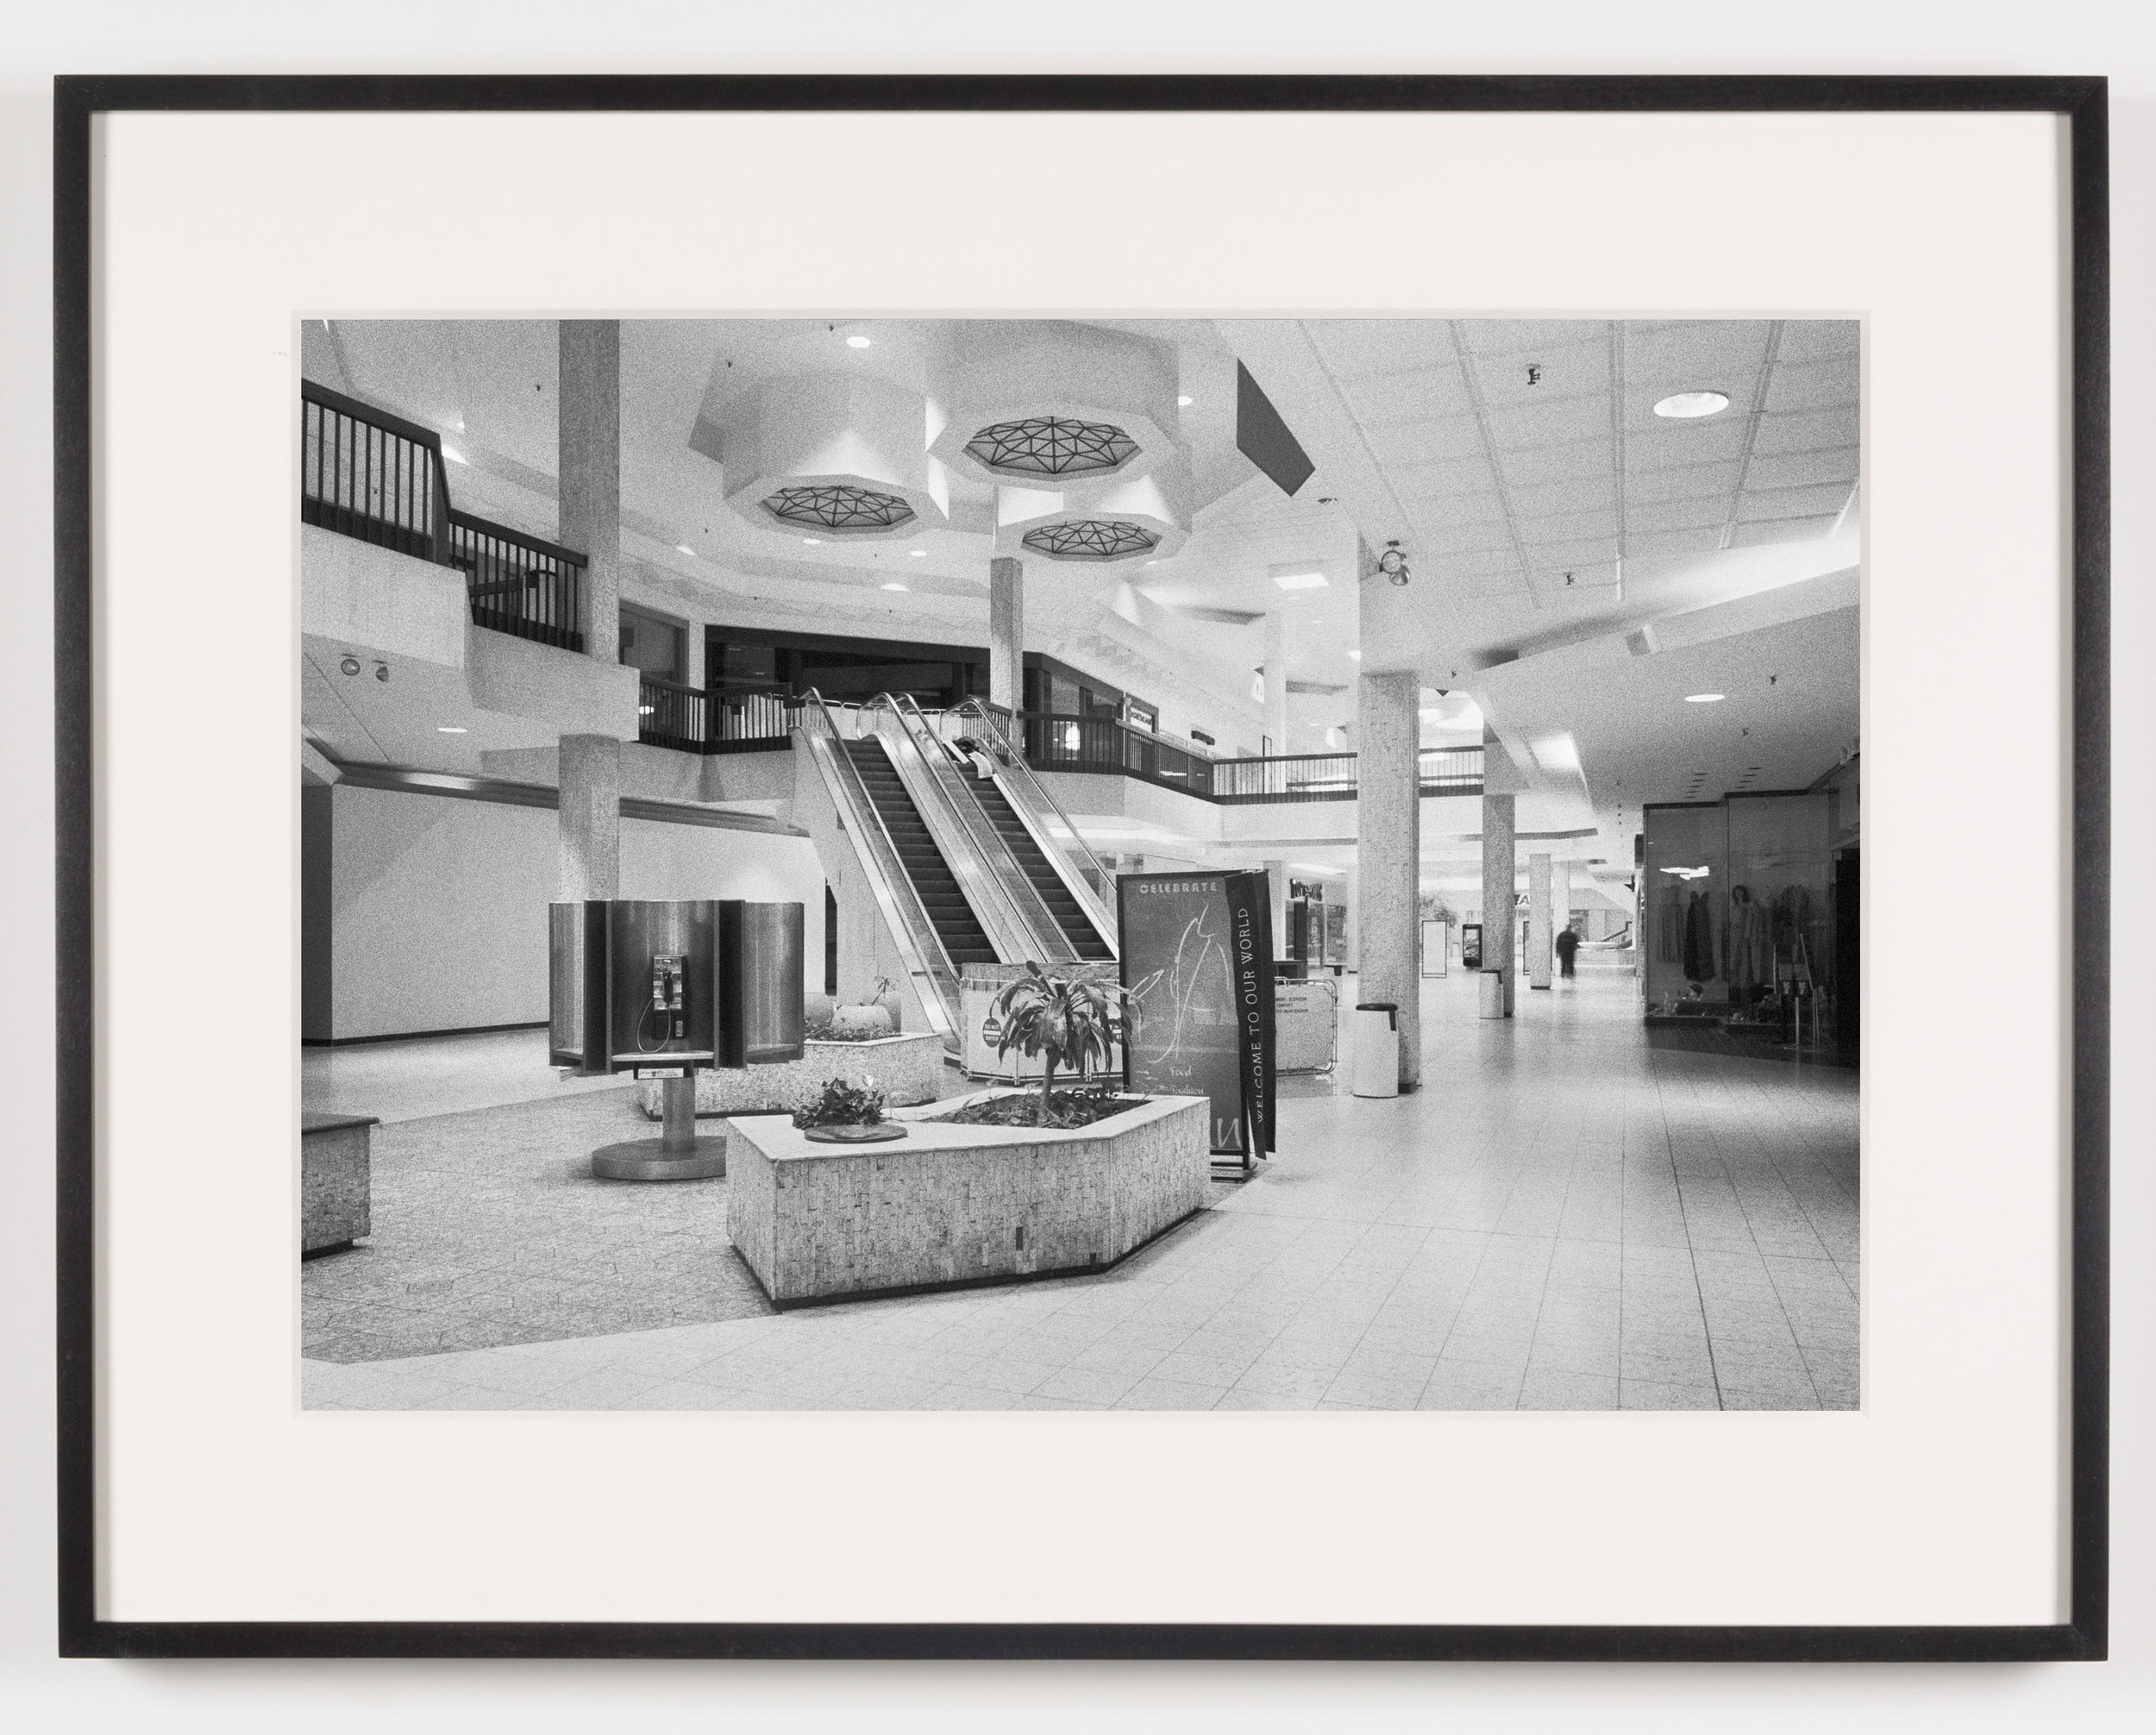   Randall Park Mall (View of Interior), North Randall, OH, Est. 1976, Demo. 2014    2011   Epson Ultrachrome K3 archival ink jet print on Hahnemühle Photo Rag paper  21 5/8 x 28 1/8 inches  Exhibition:   A Diagram of Forces, 2011  